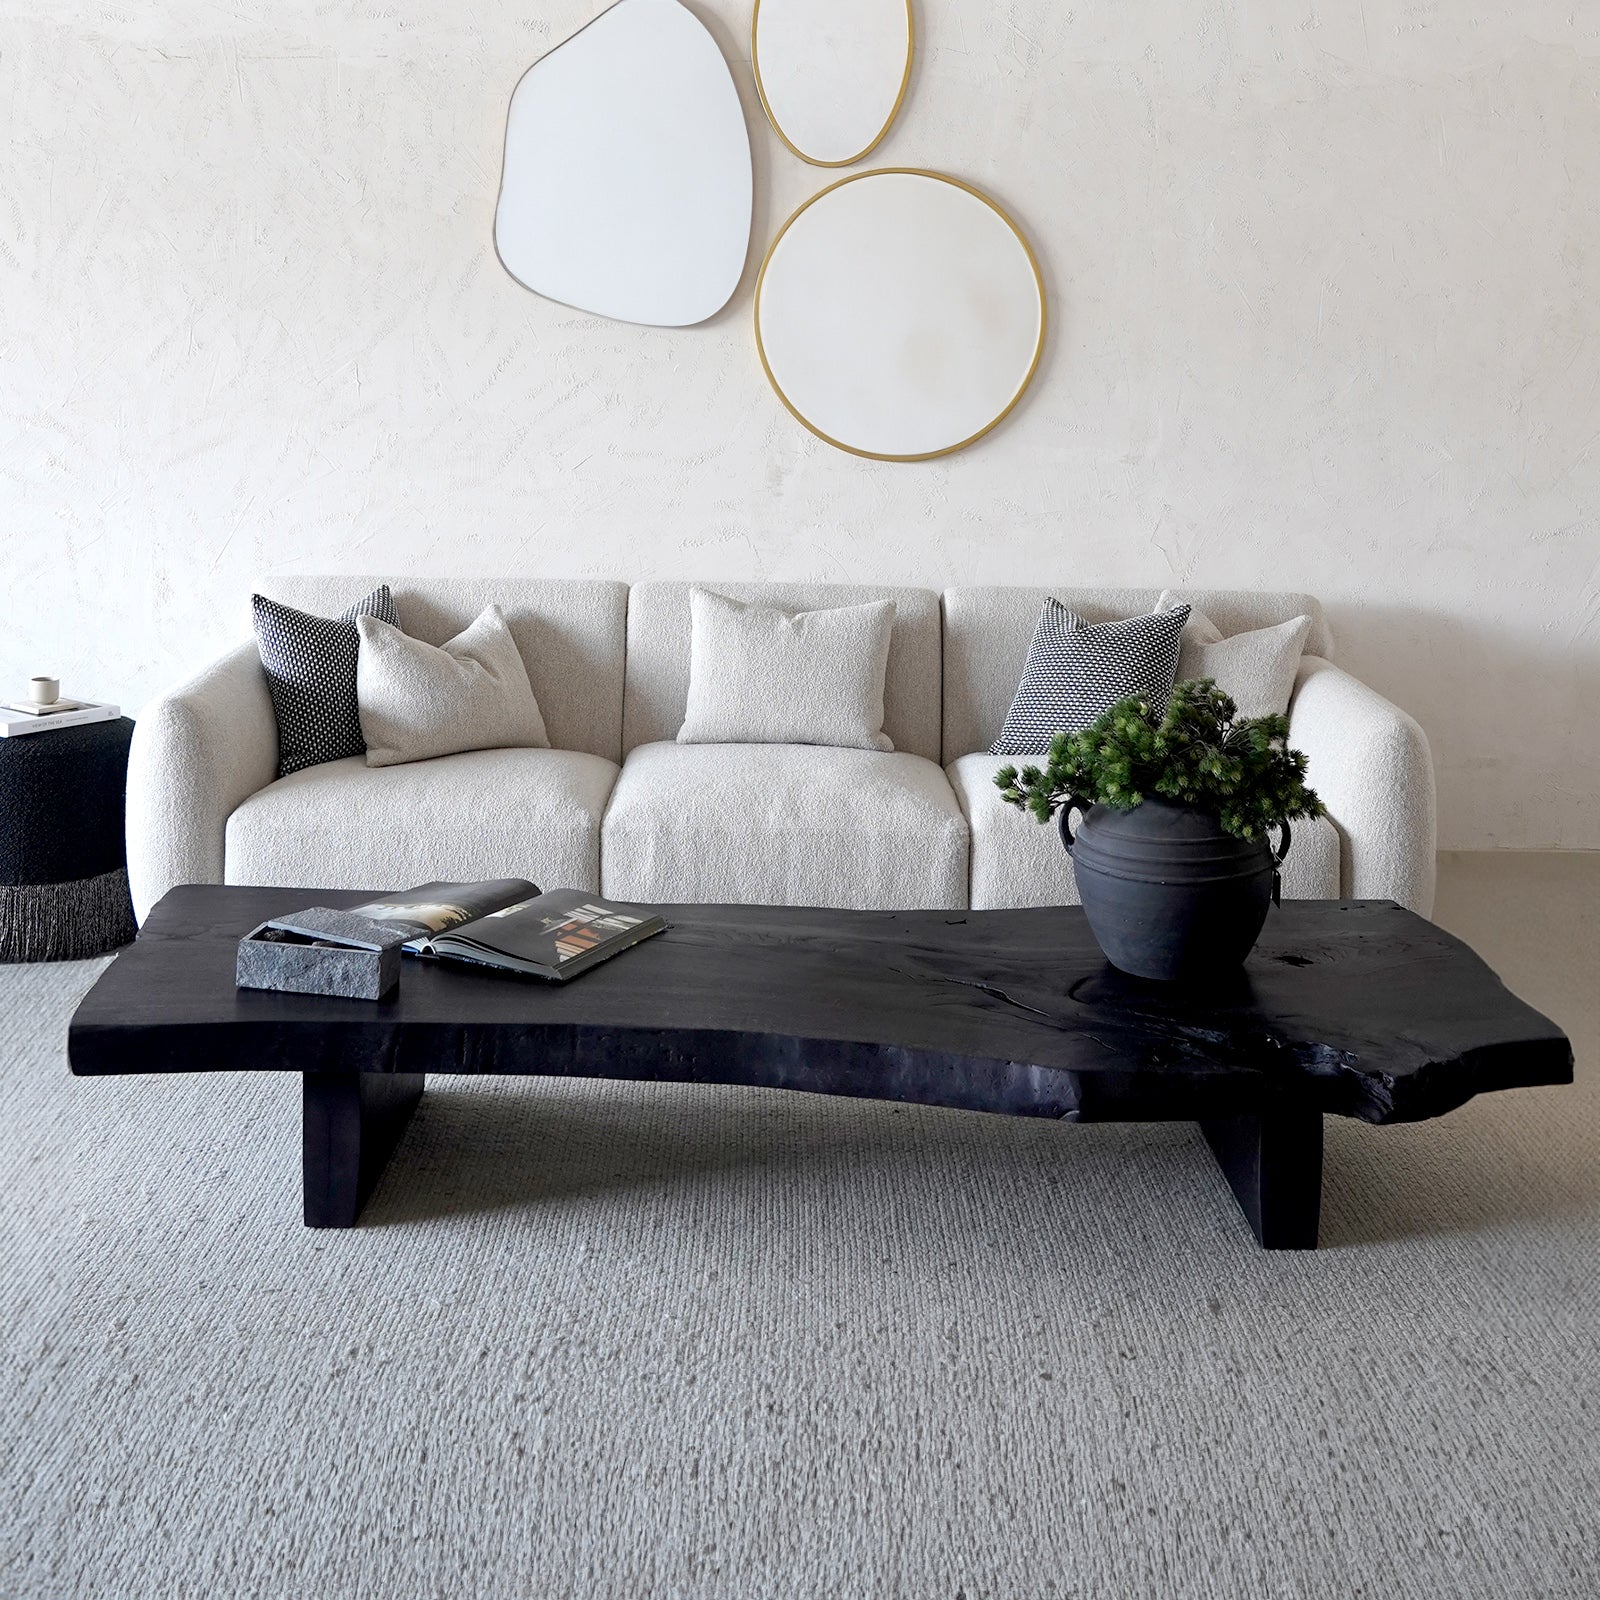 Ikou Handcrafted Black Solid Wood - Live Edge Coffee Table - Coffee Tables - WS Living - UAE Wood and steel Furnitures in Dubai